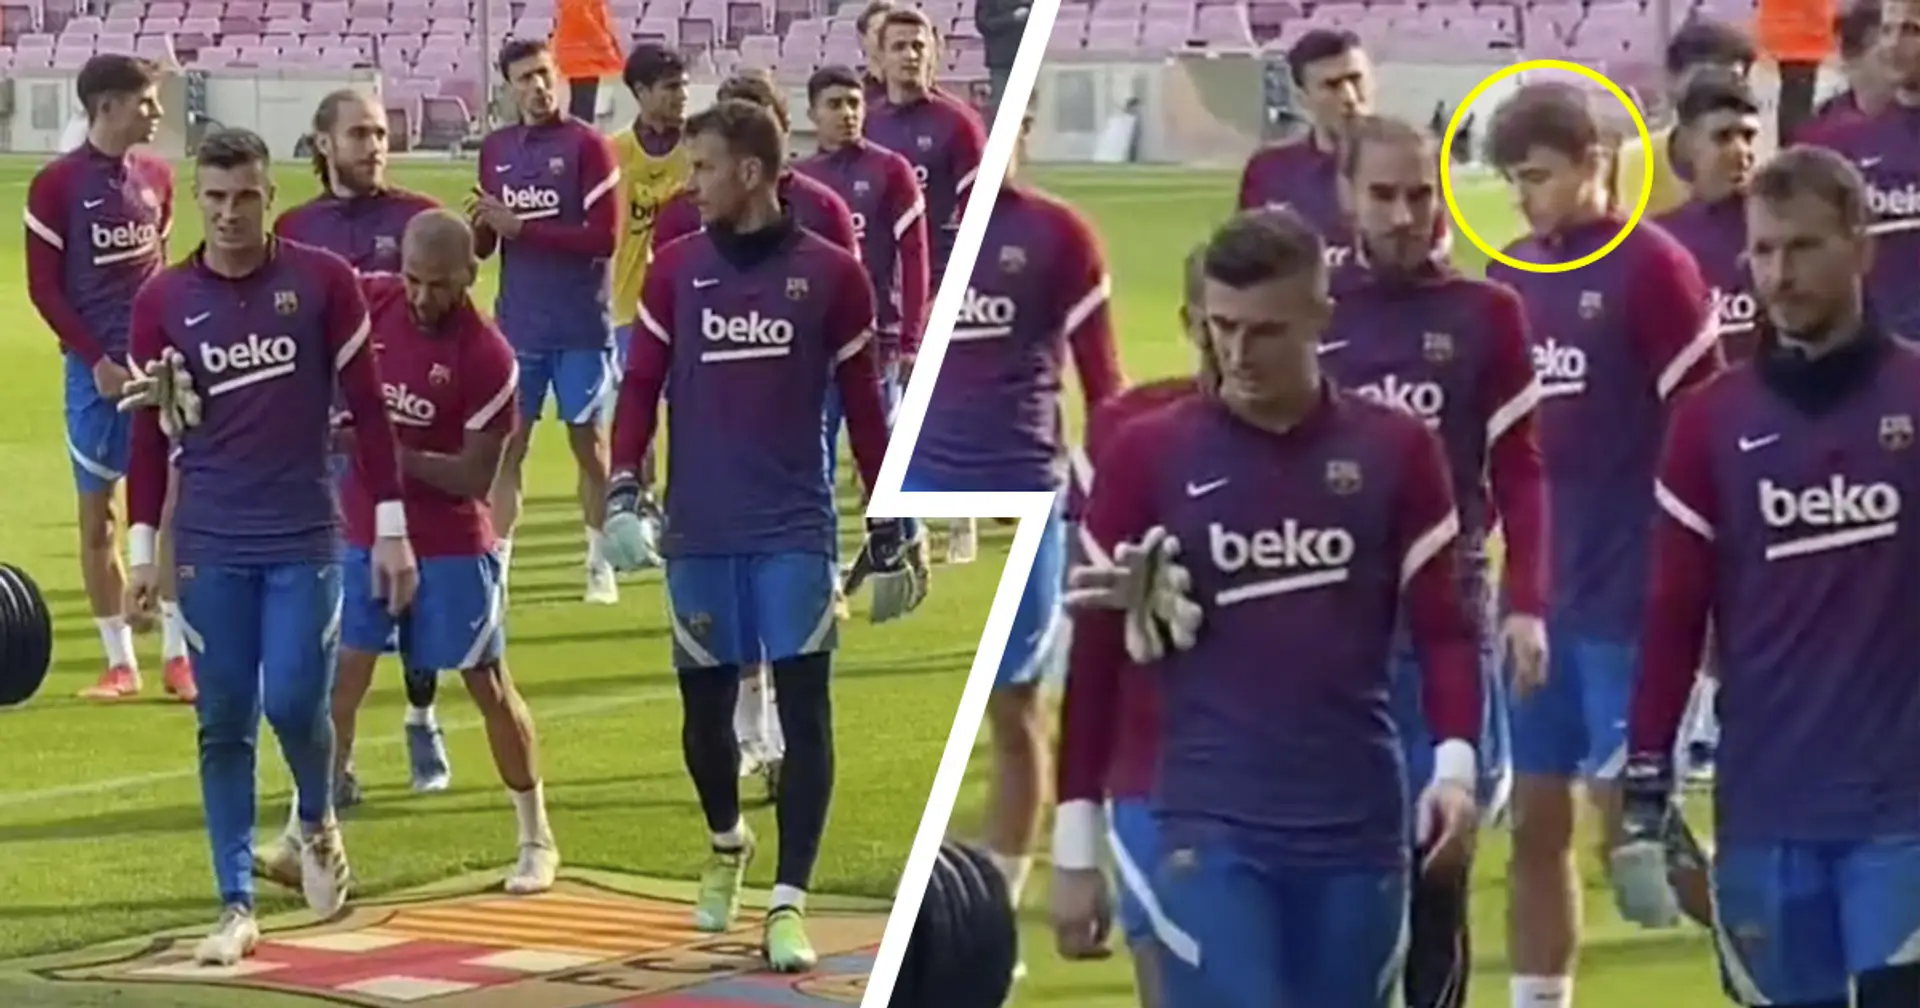 Caught on camera: Dani Alves' brilliant gesture repeated by Nico in training